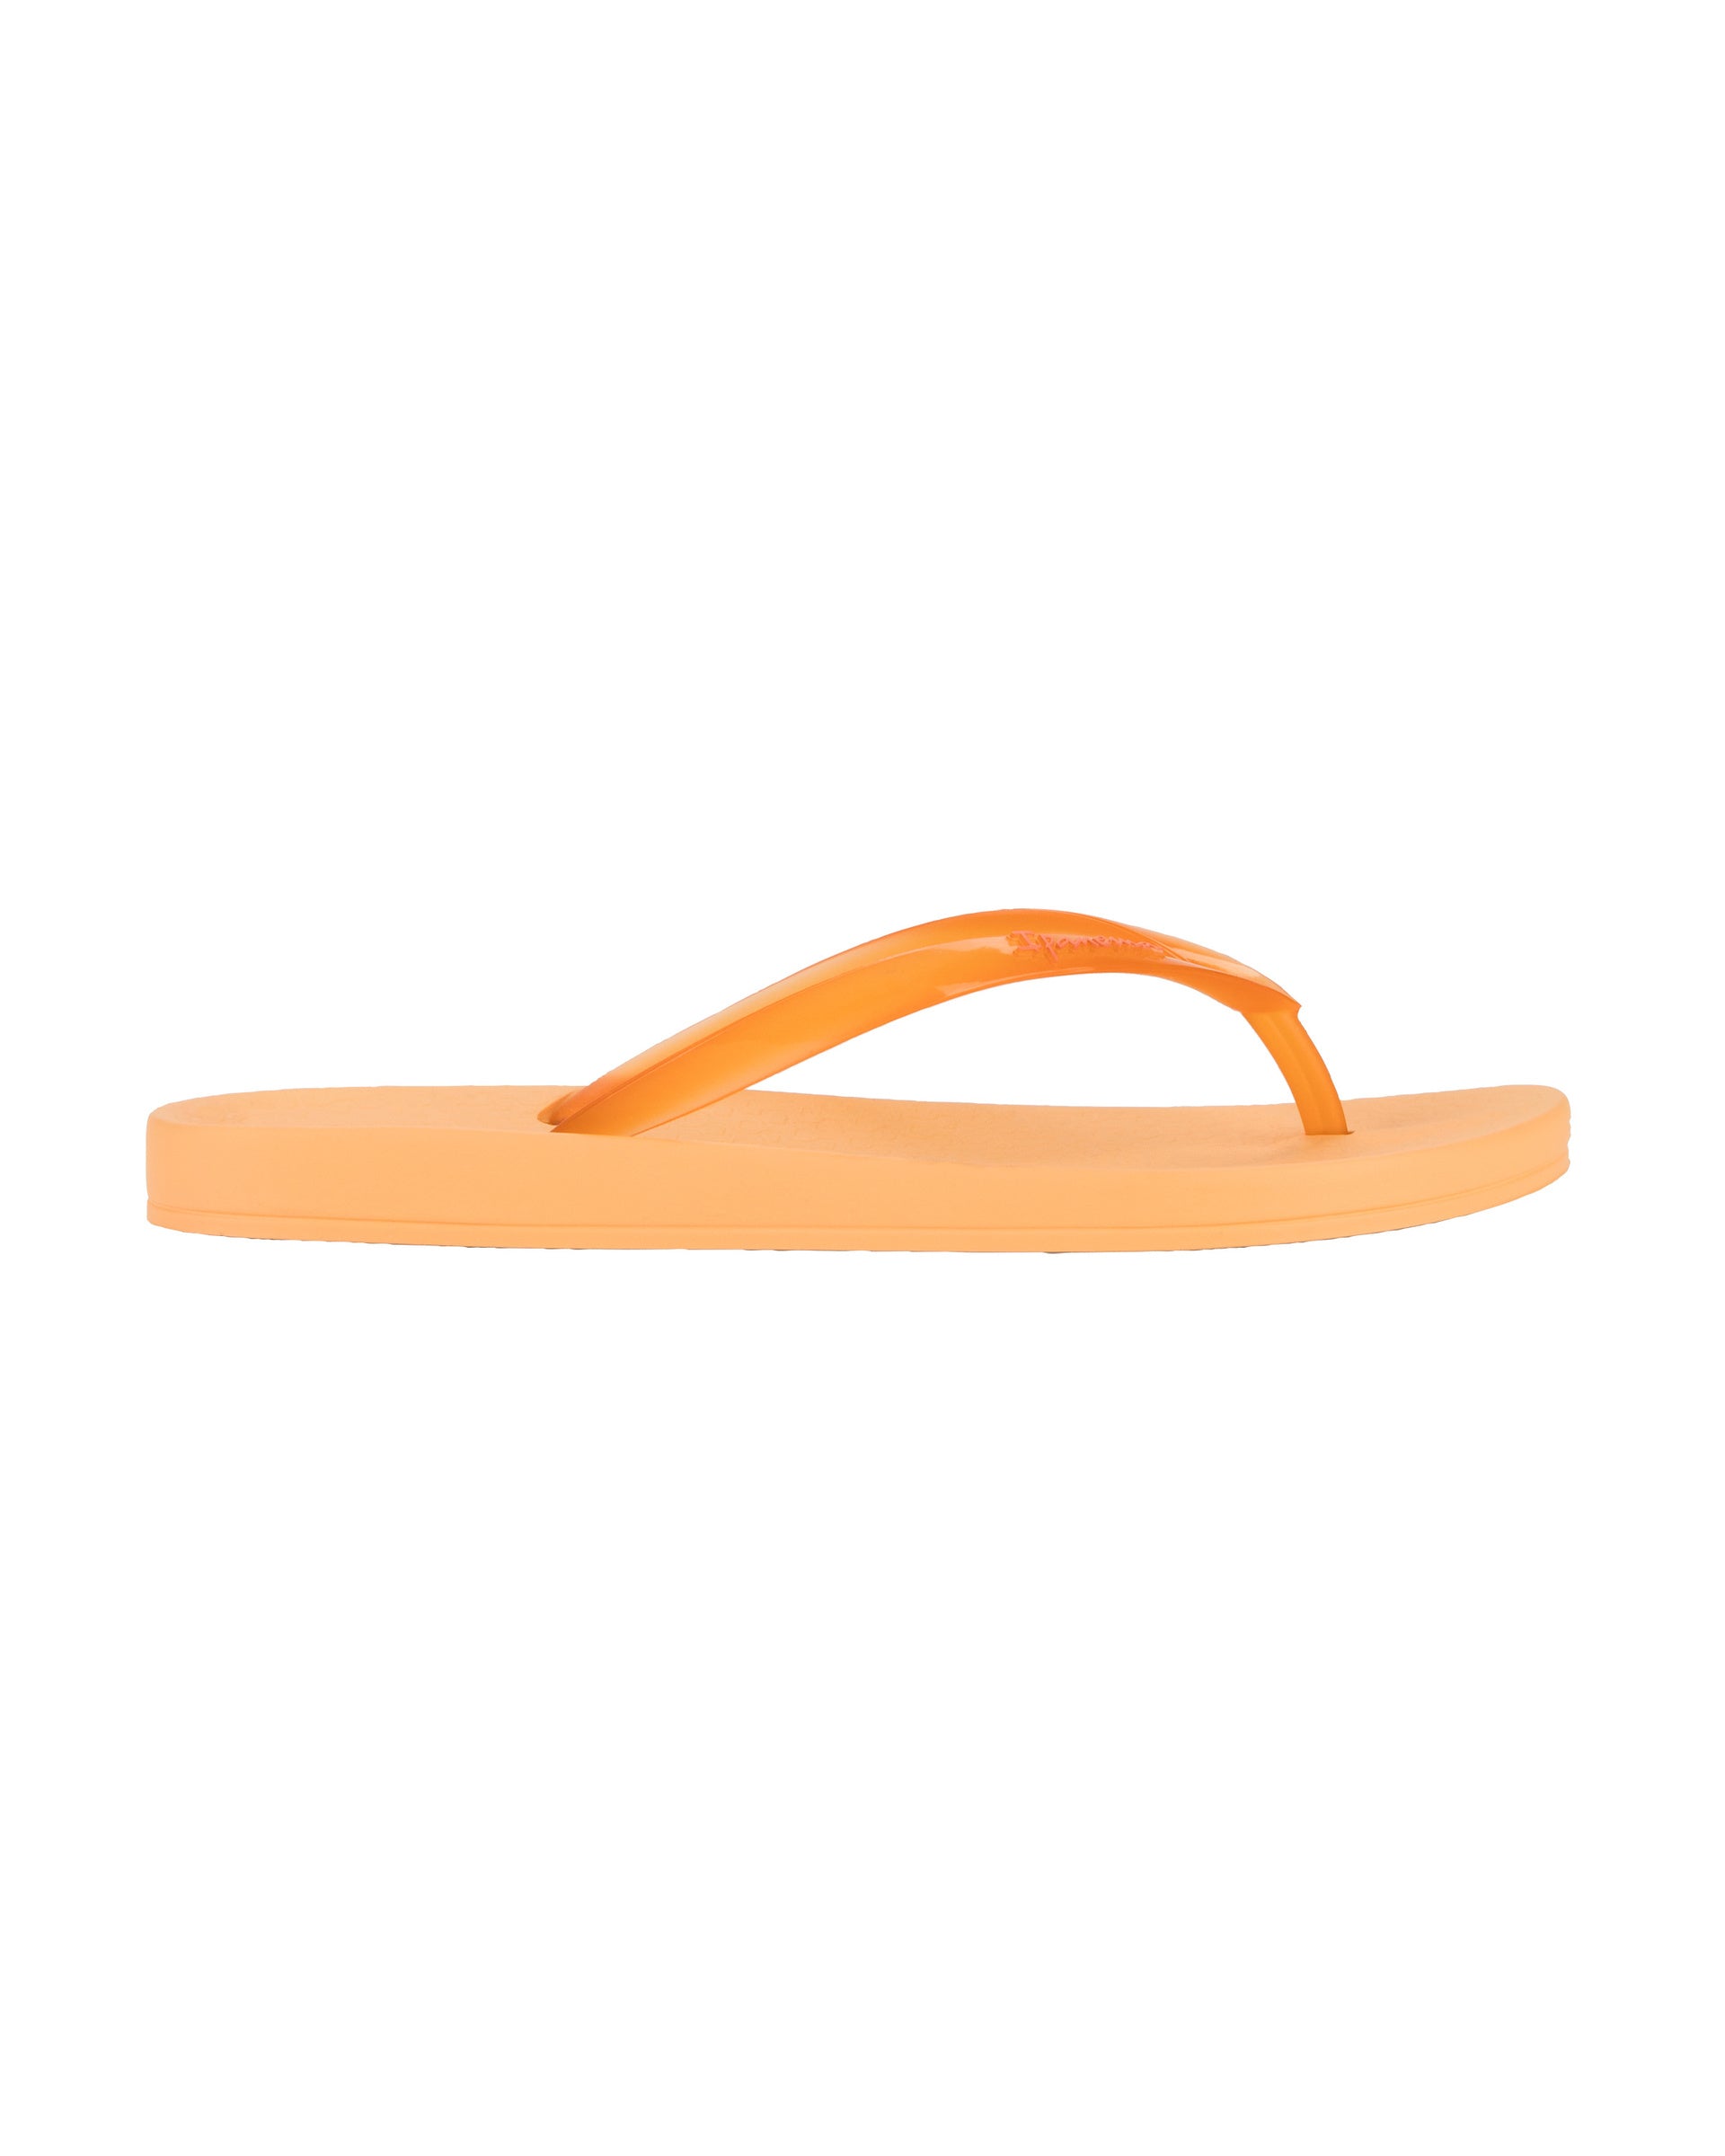 Outer side view of a orange Ipanema Ana Connect women's flip flop with a clear orange strap.